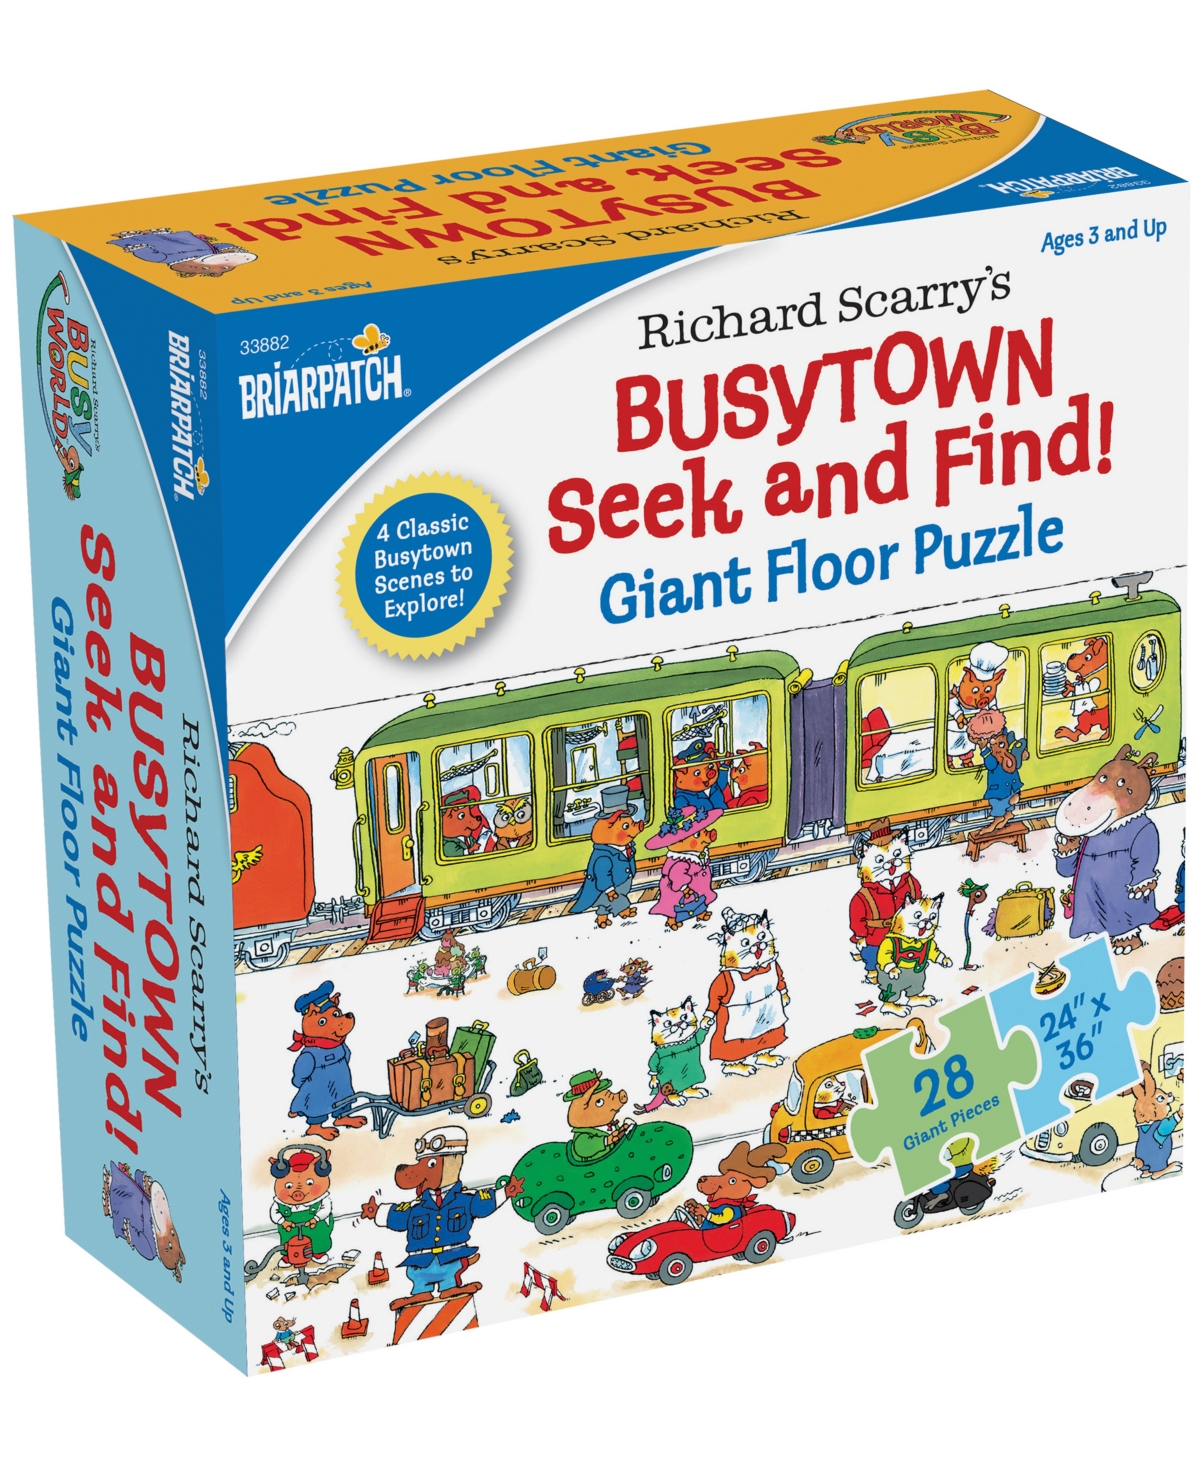 University Games Babies' Briarpatch Richard Scarry's Busytown Seek And Find Giant Floor Puzzle, 28 Pieces In No Color